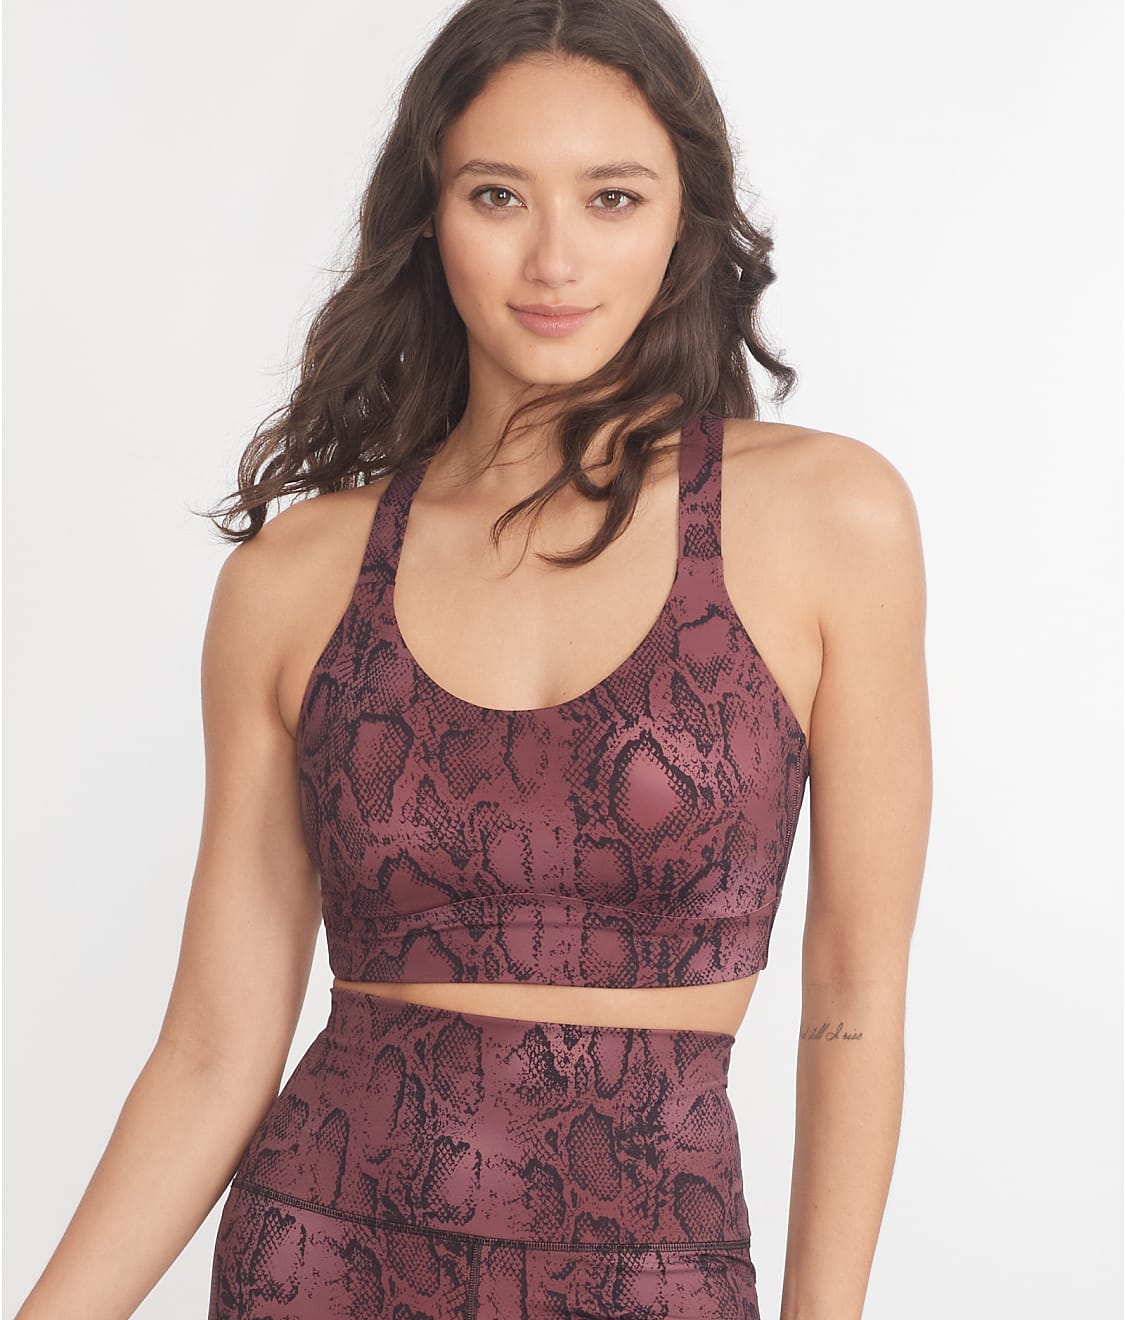 Running Bare Activewear Sale - Sports Bras and Workout Tops Up to 50% Off